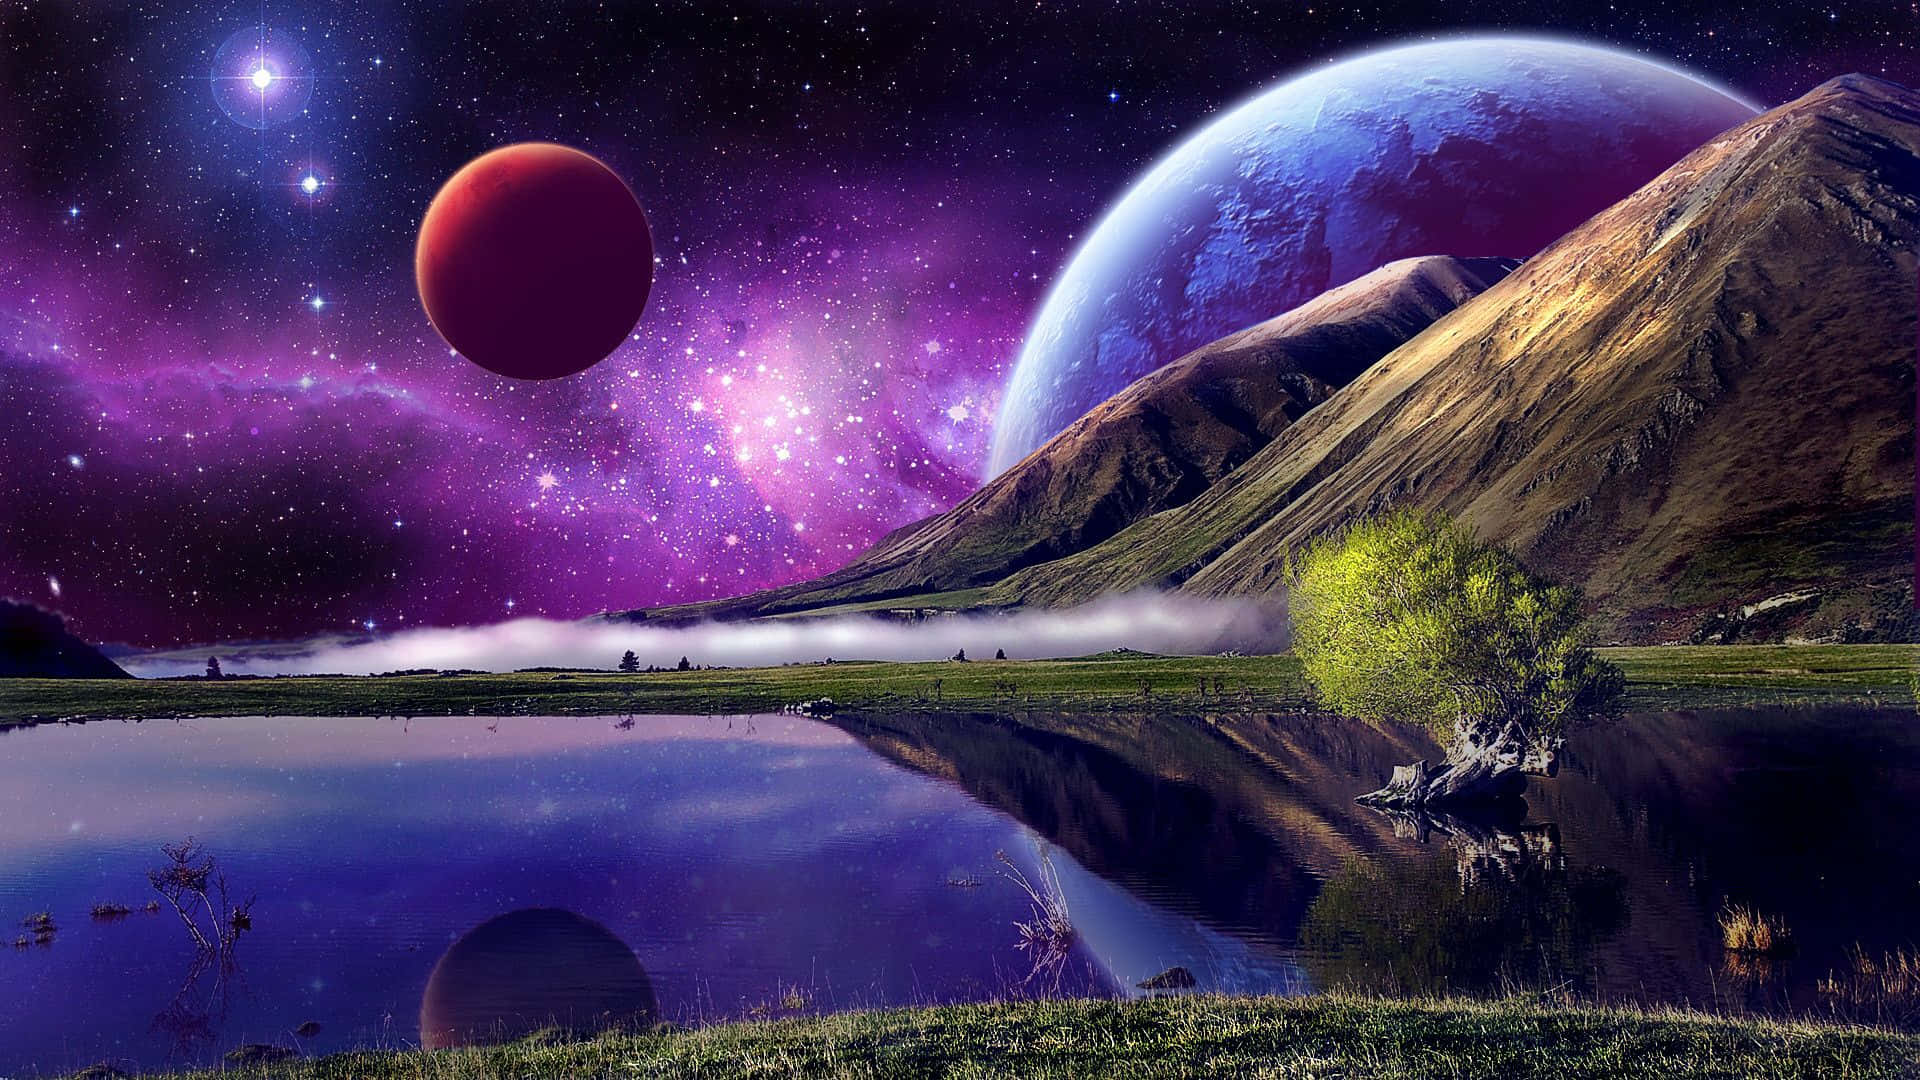 "Escape to the depths of space with this beautiful desktop wallpaper!"